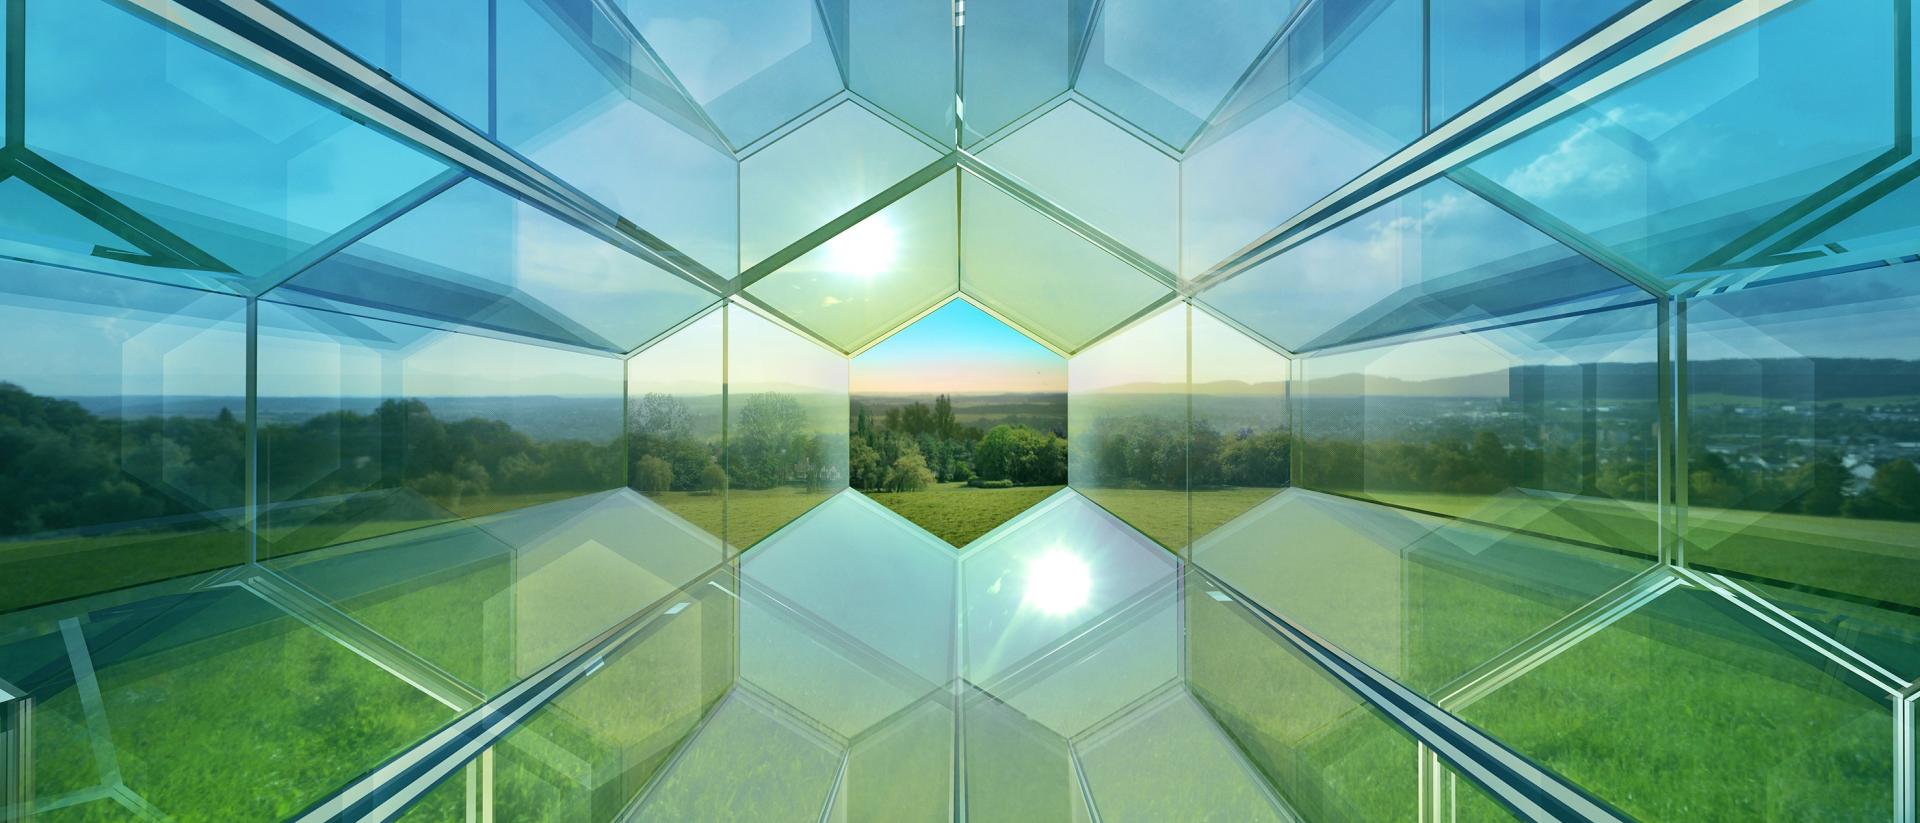  Glass shapes a brighter future